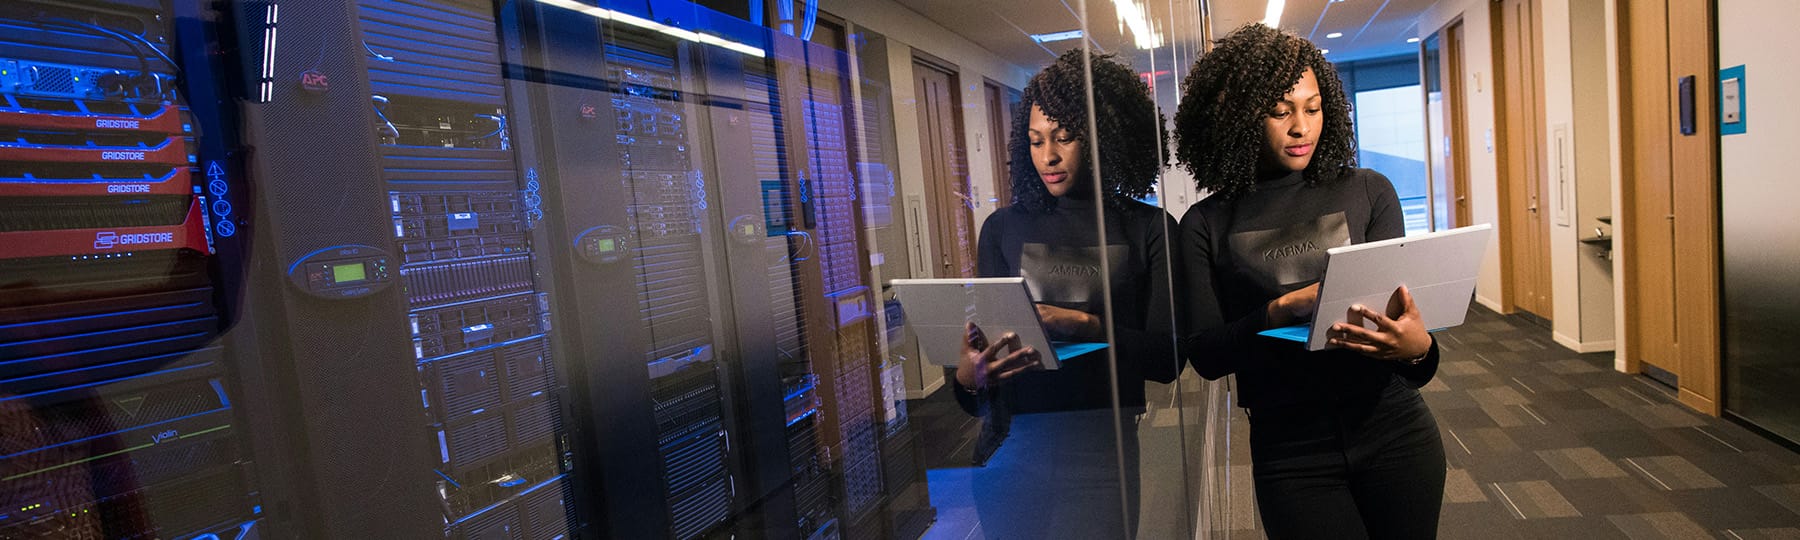 A woman with dark curly hair dressed in all black and holding a laptop leans against a glass panel on the outside of a server room.